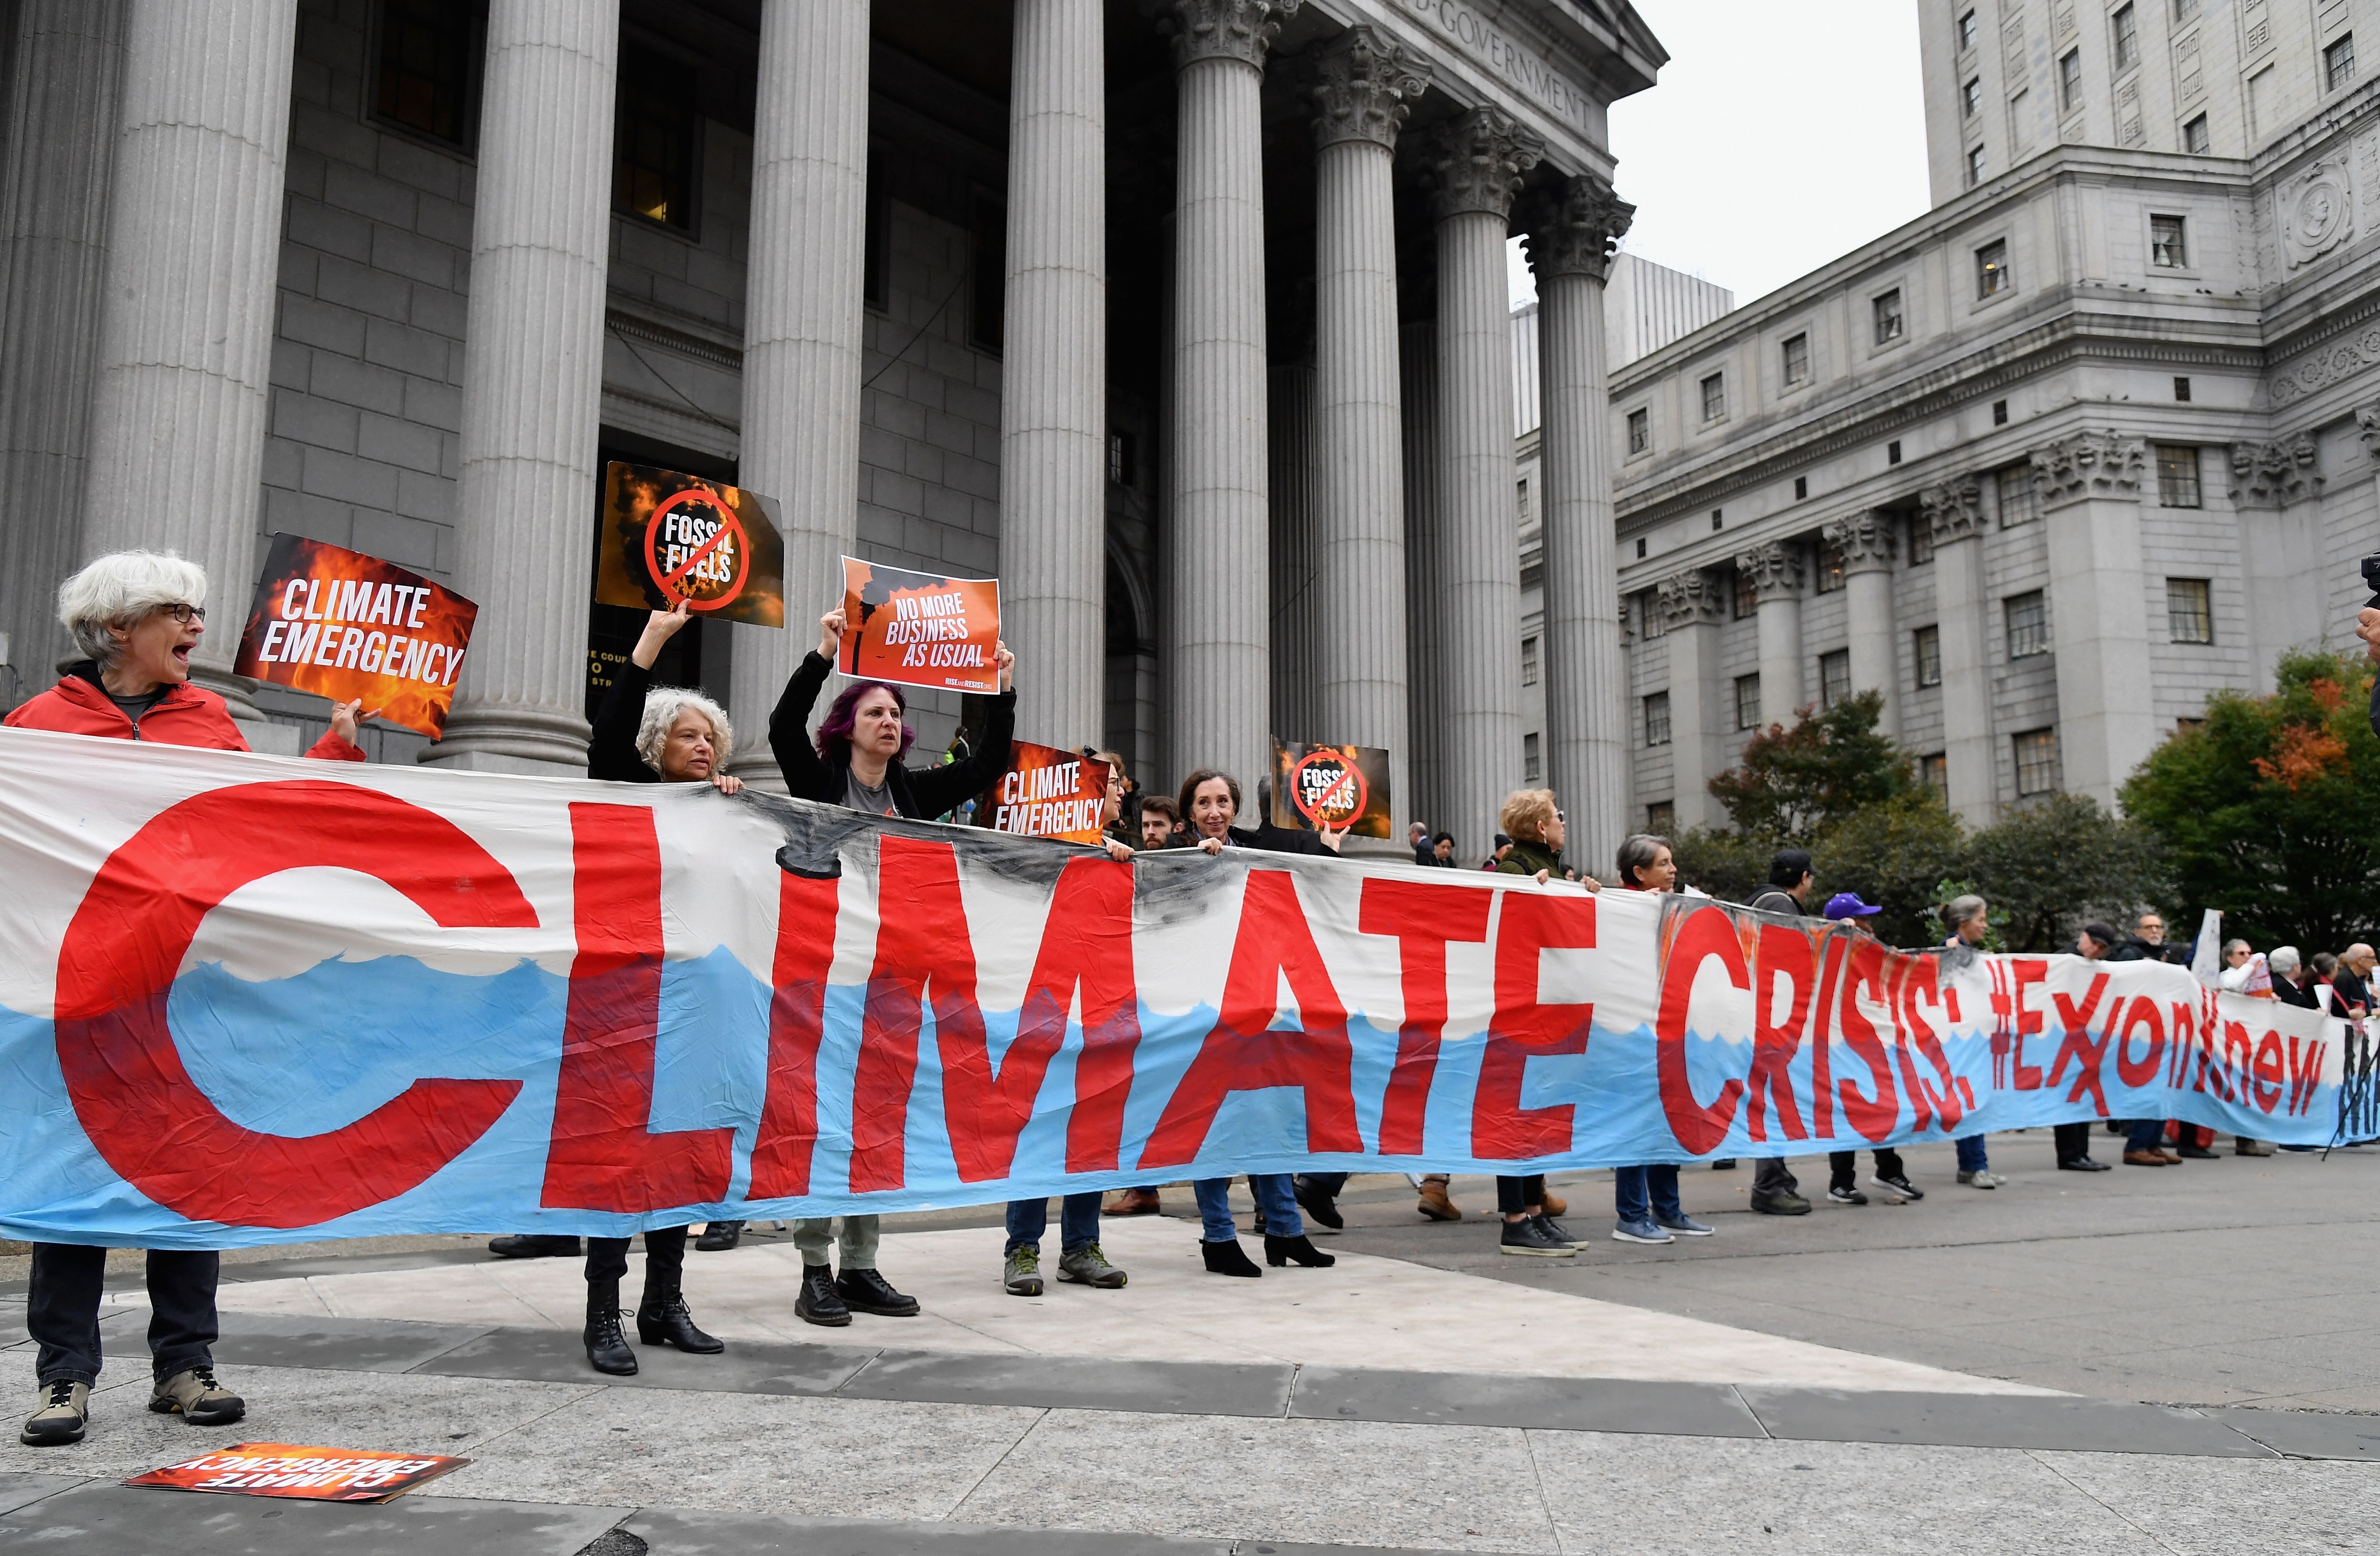 Climate activists protest outside the New York State Supreme Court building on October 22, 2019. (Angela Weiss/AFP/Getty Images)